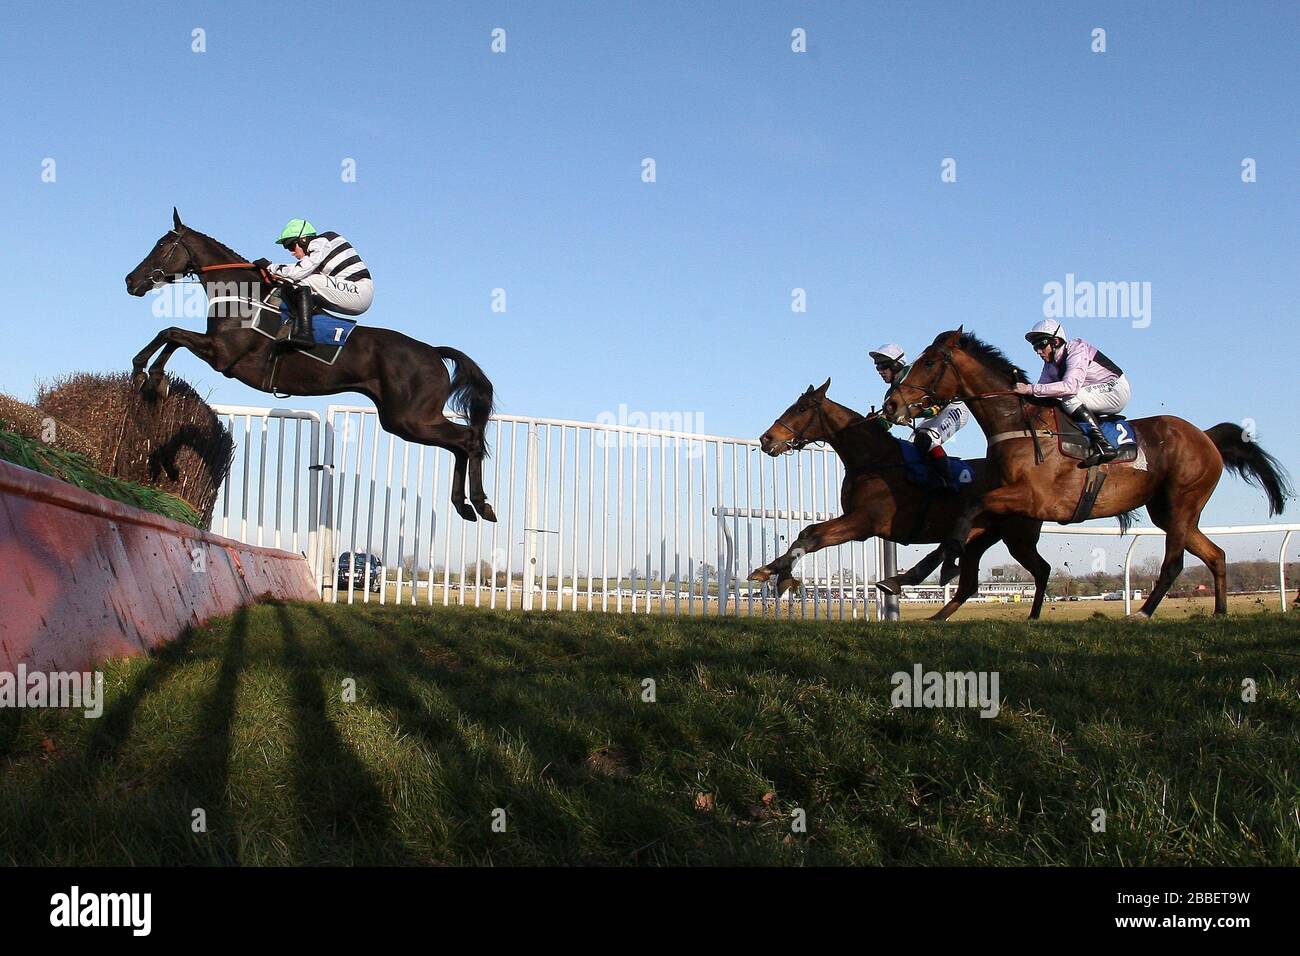 Race winner Owen Glendower ridden by Barry Geraghty in jumping action during the Weatherbys Cheltenham Festival Betting Guide Novices Chase Stock Photo